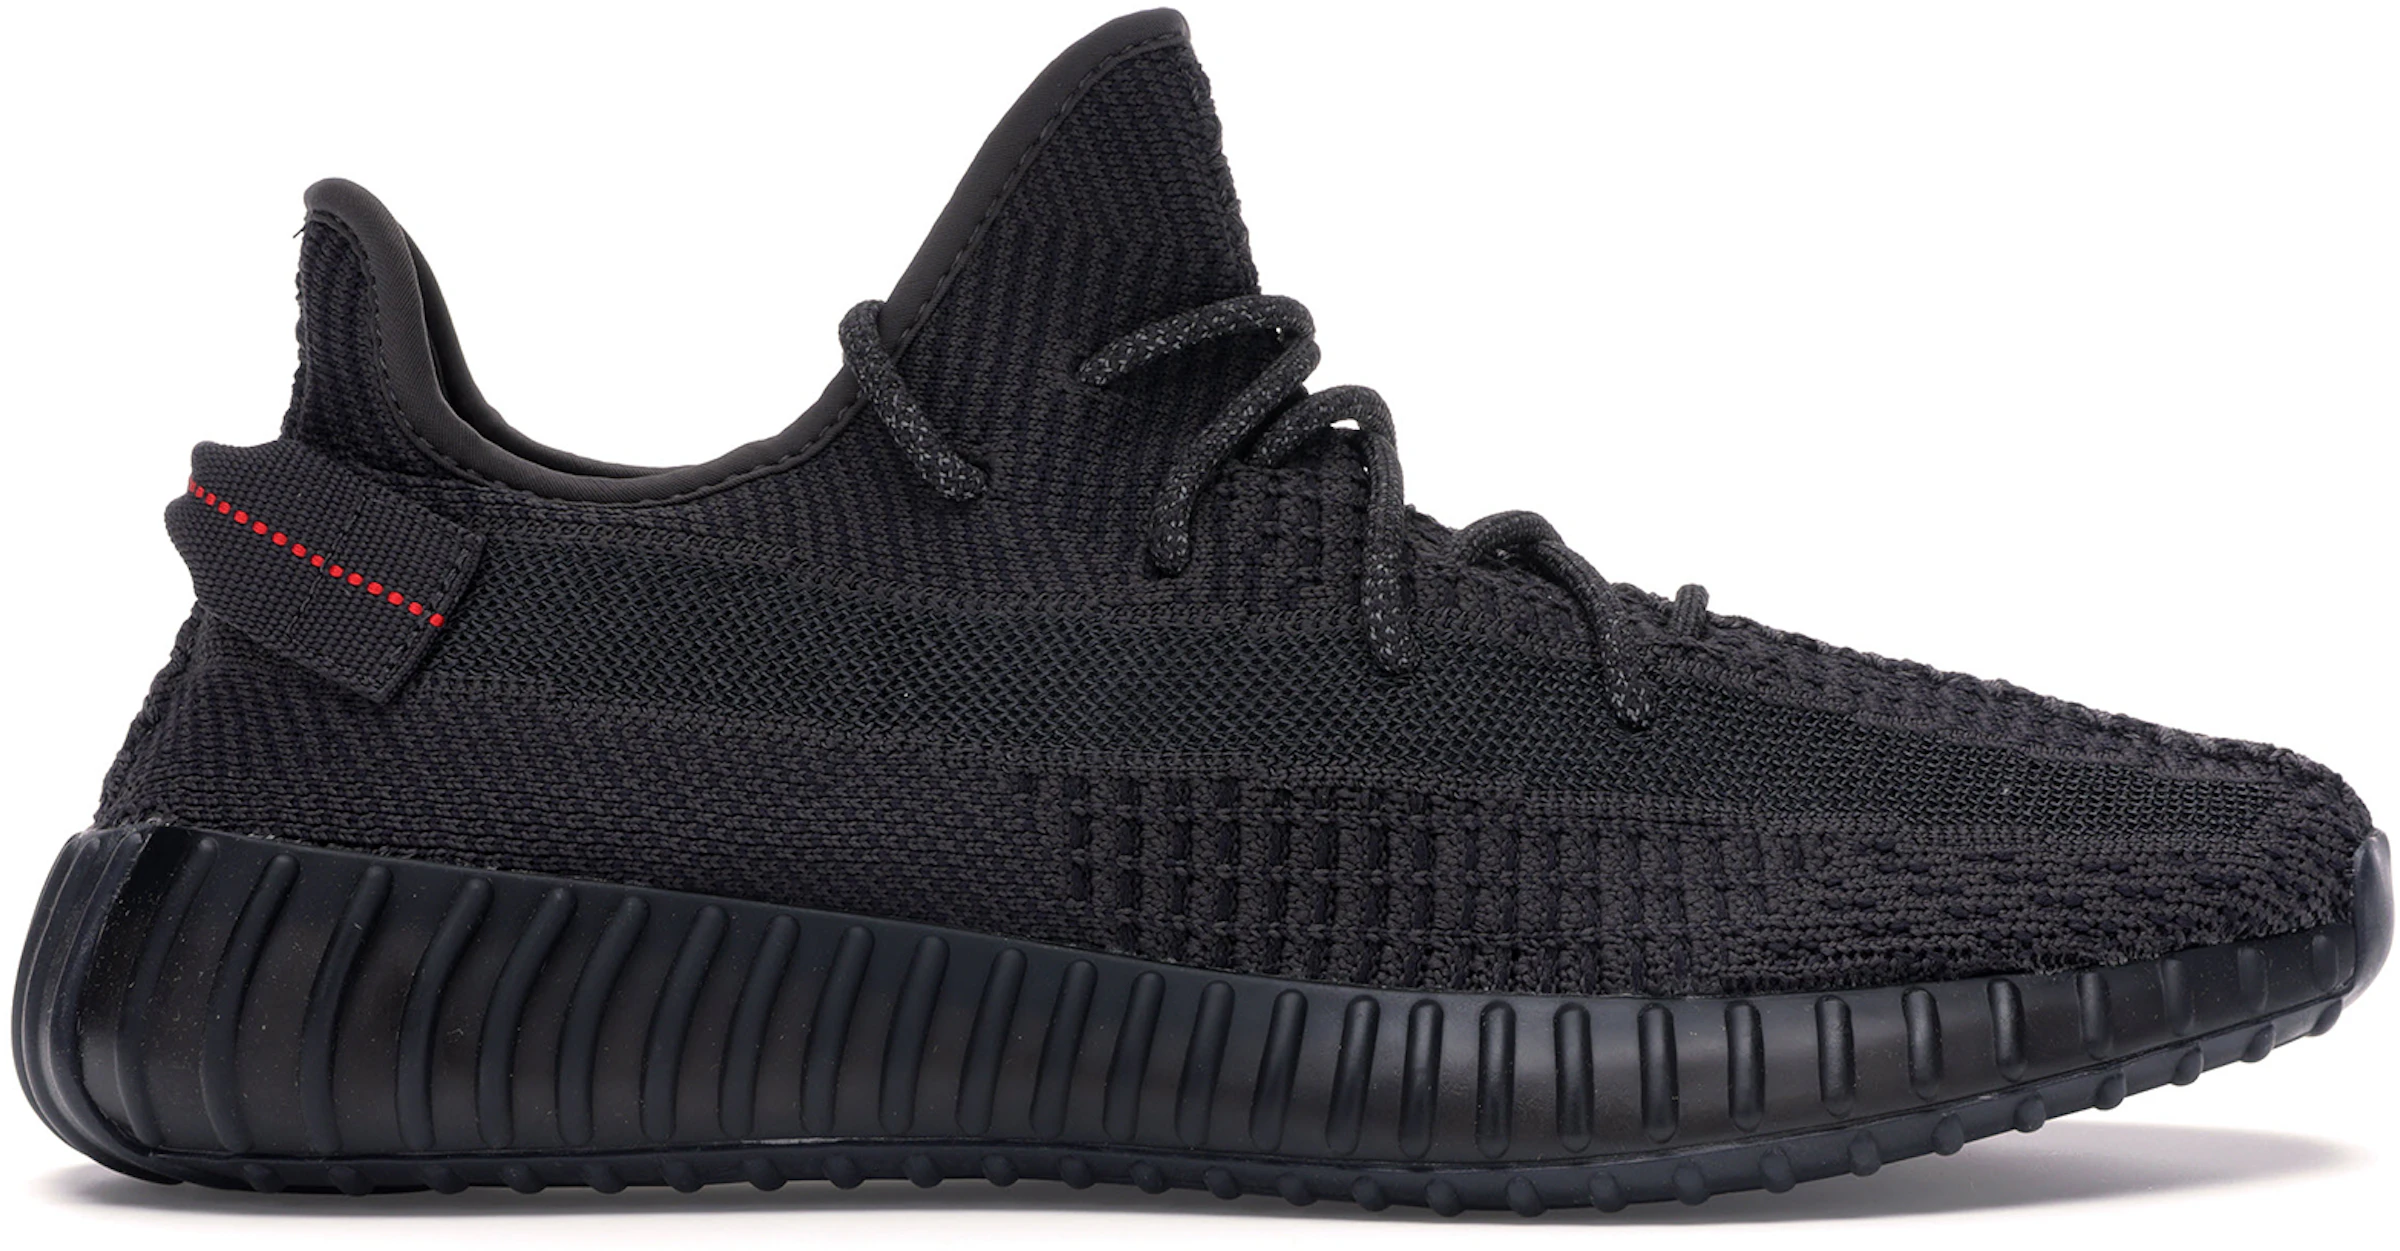 Adidas Yeezy Boost 350 V2 Core Black-Red | peacecommission.kdsg.gov.ng